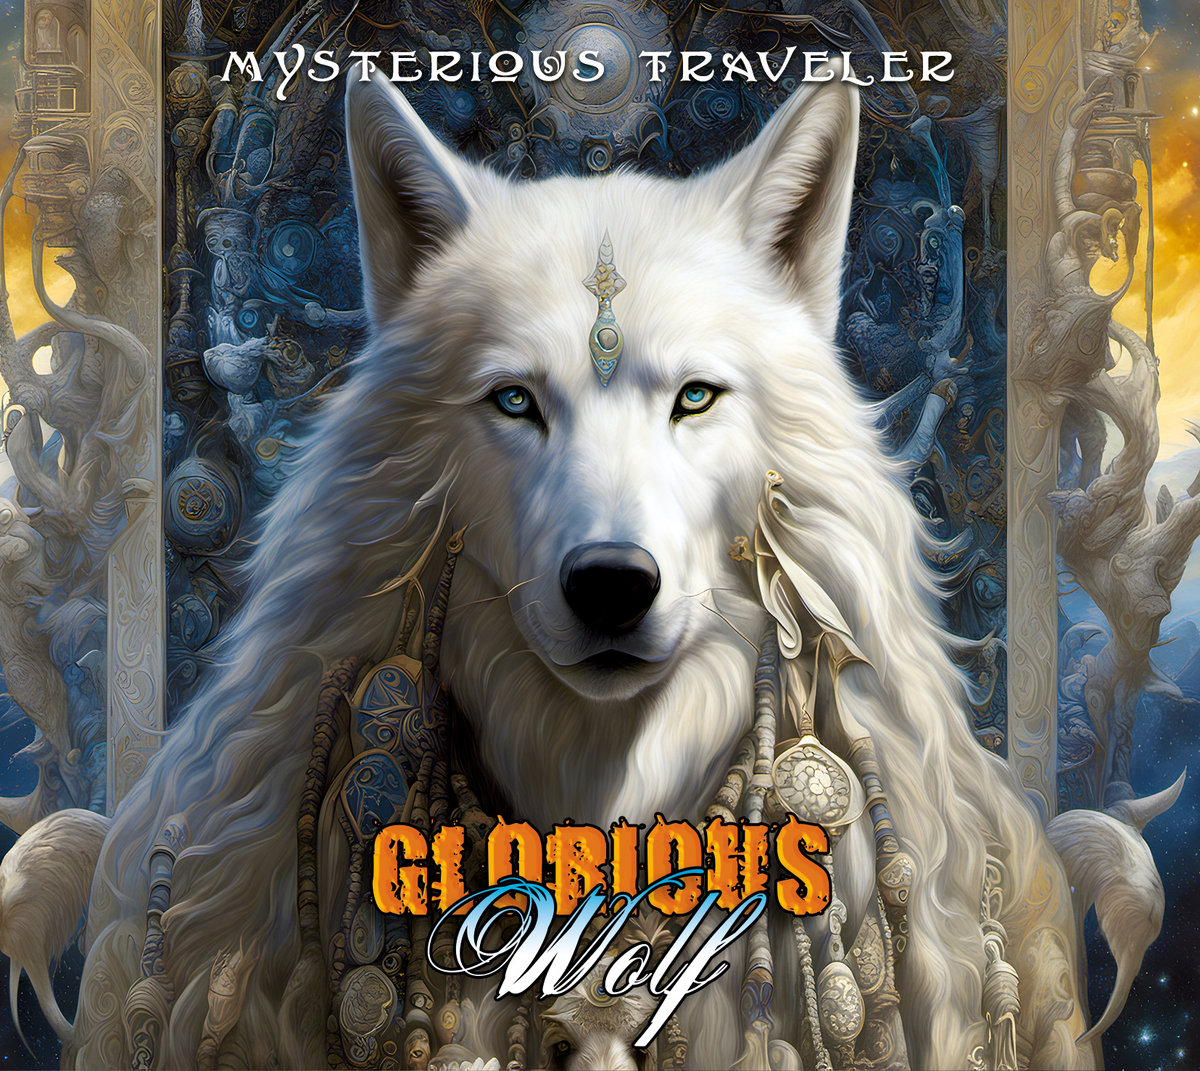 Glorious Wolf Mysterious Traveler. If you’re in to your symphonic prog/metal with that retro feel then Glorious Wolf’s Mysterious Traveler is for you. Superb expansive symphonic progressive rock/metal.
newwaveofbritishheavymetal.com/glorious-wolf-… #gloriouswolf #progressivemetal #progrock